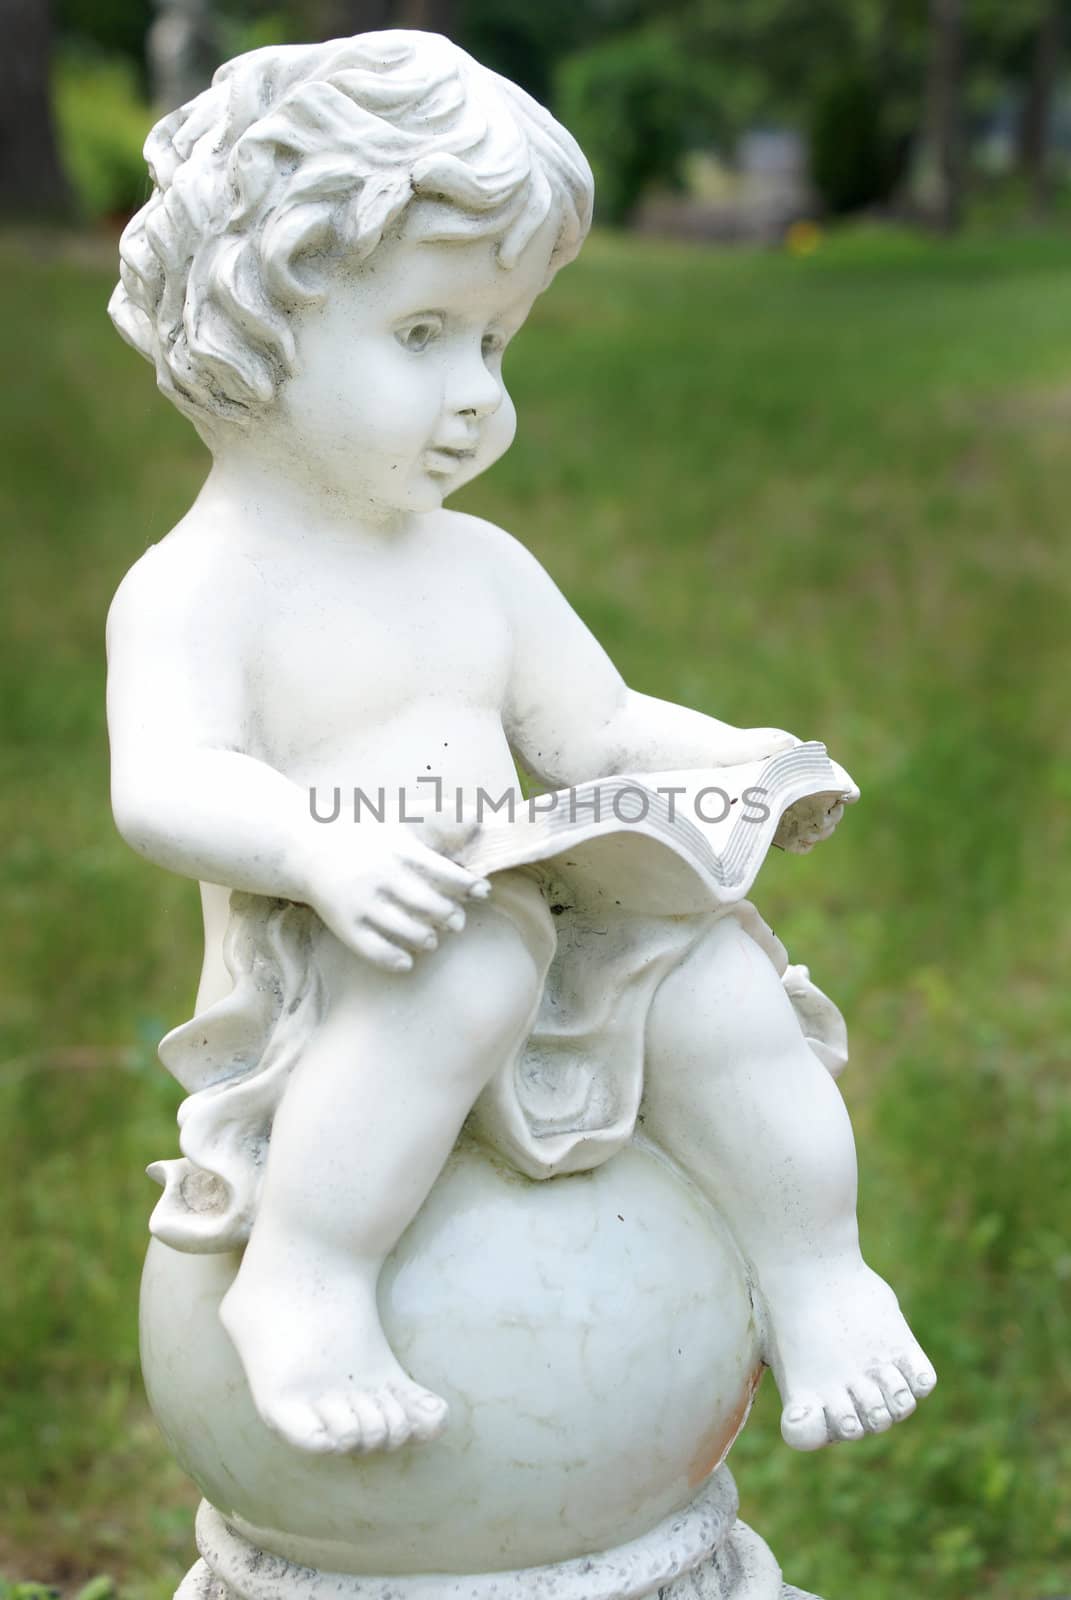 A closeup of a statue of a small boy reading a book.